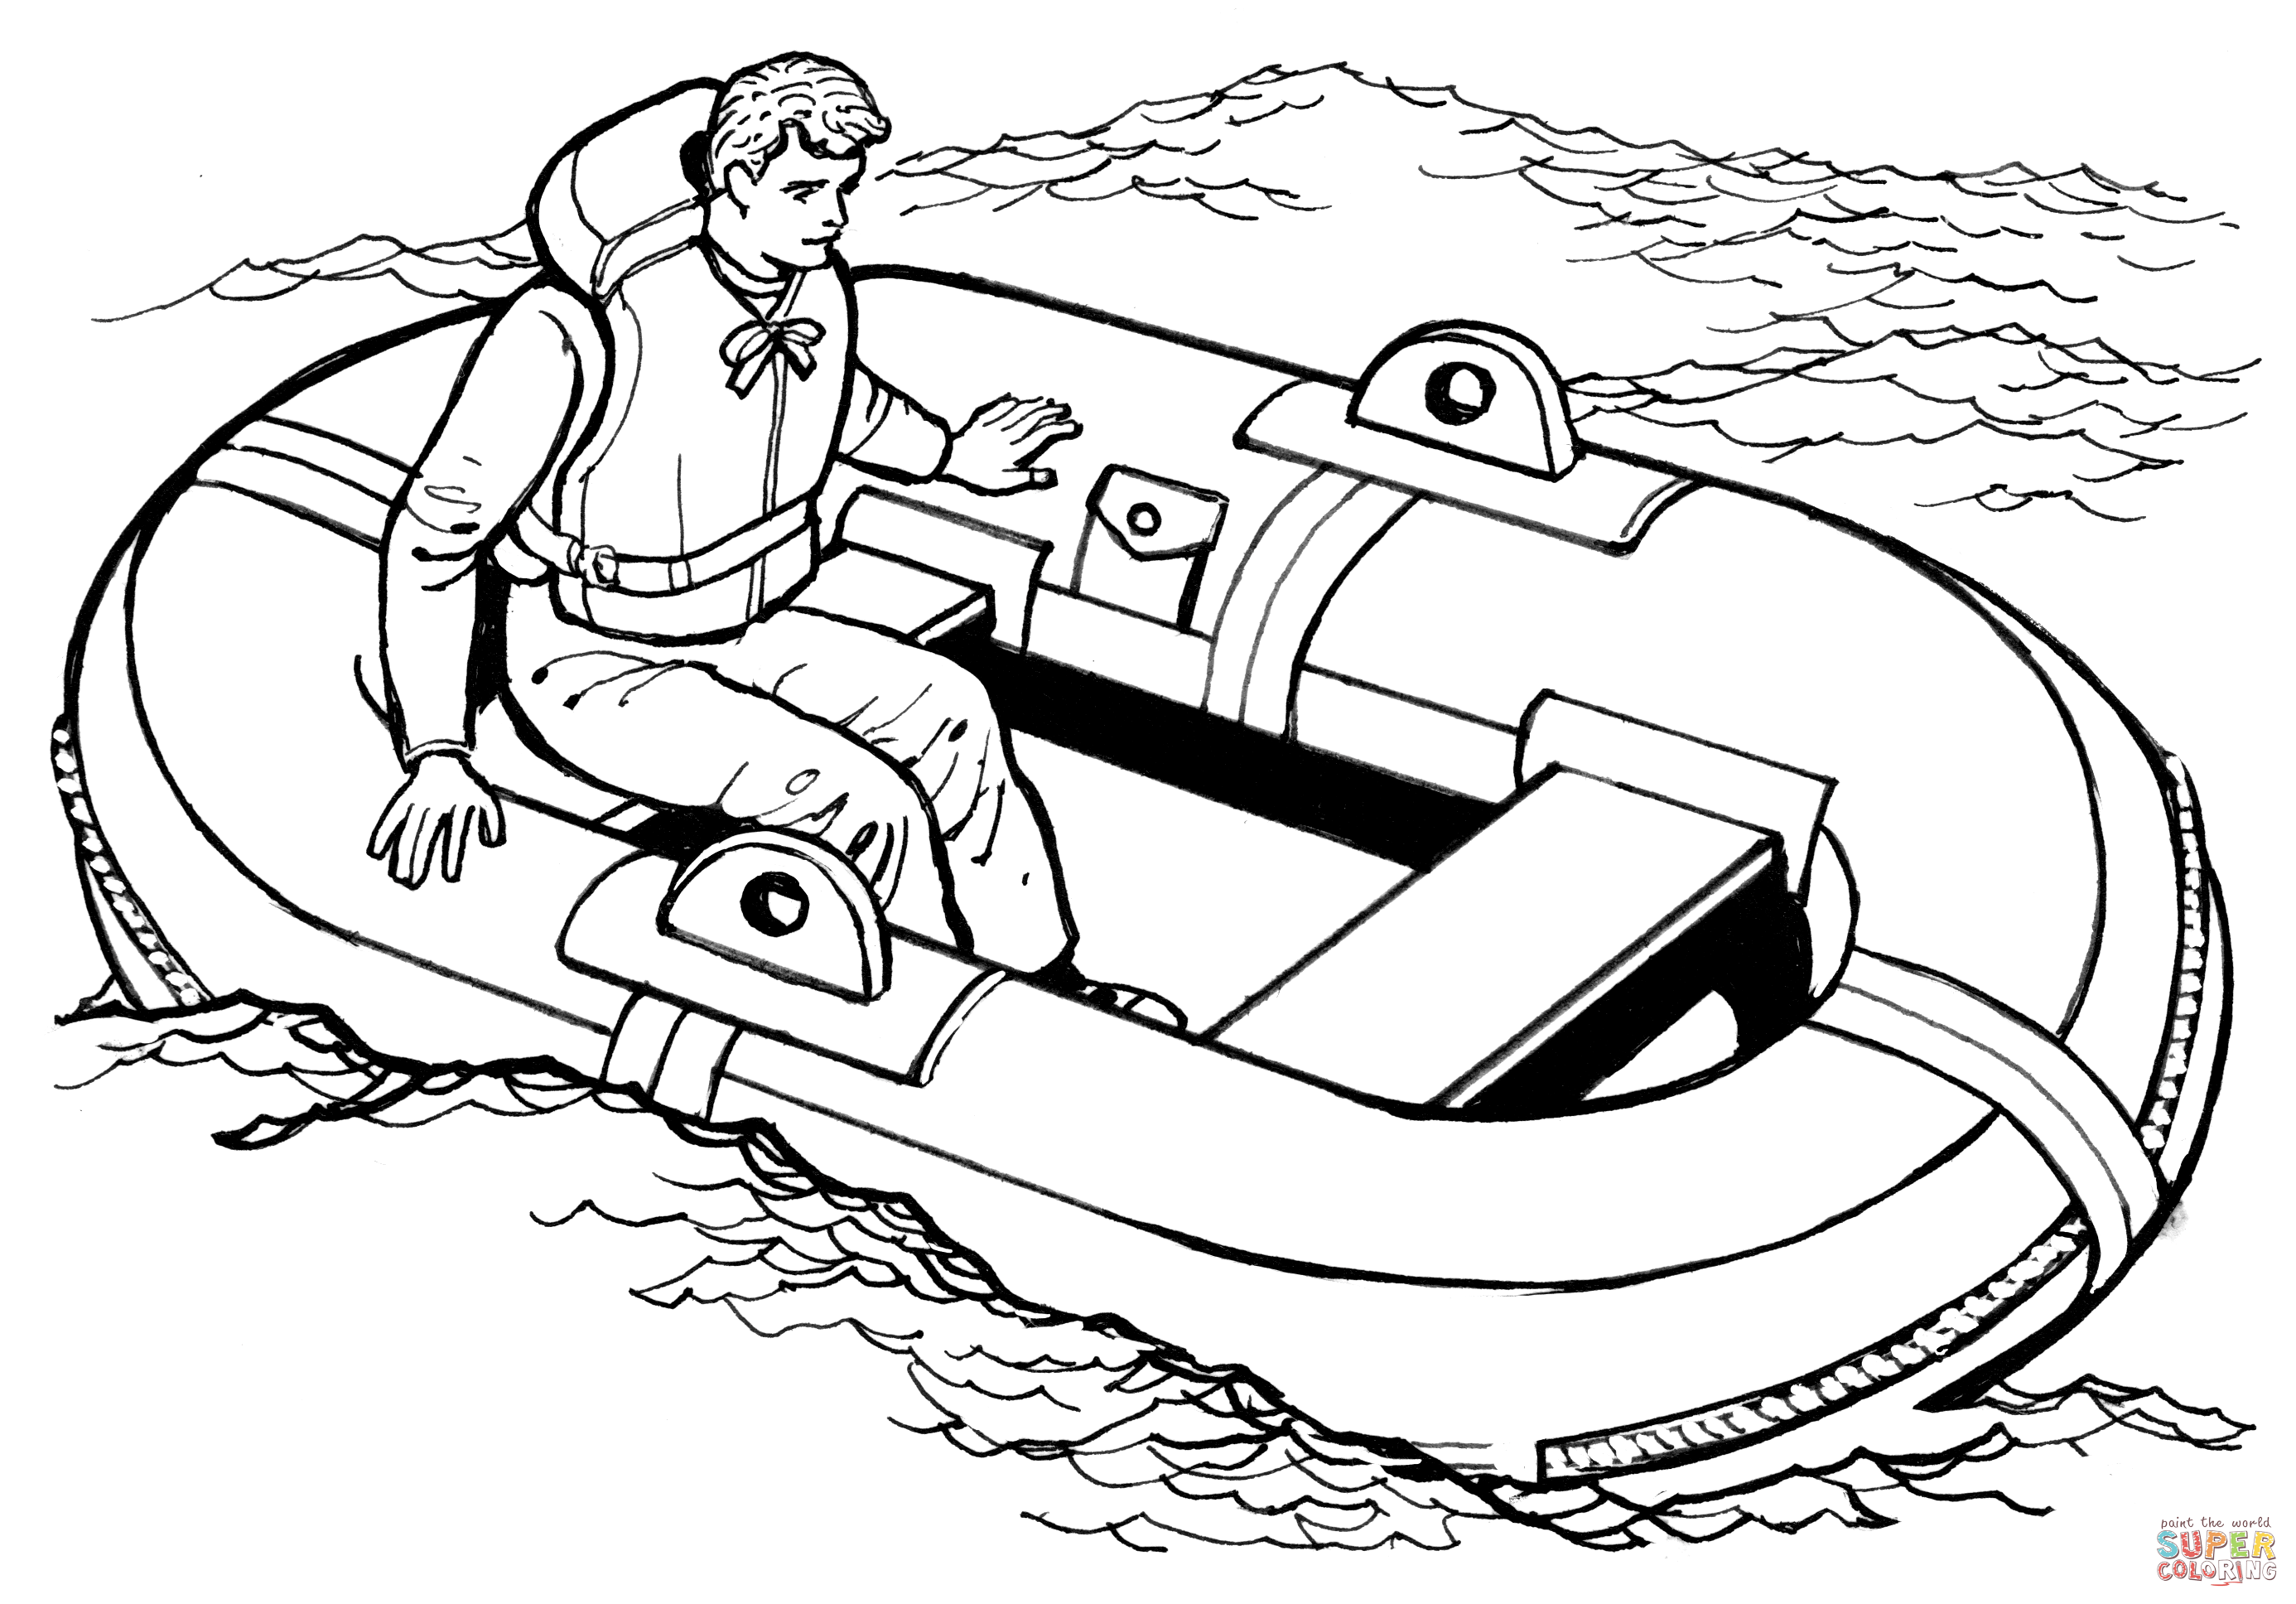 Man on a Life Raft coloring page | Free Printable Coloring Pages